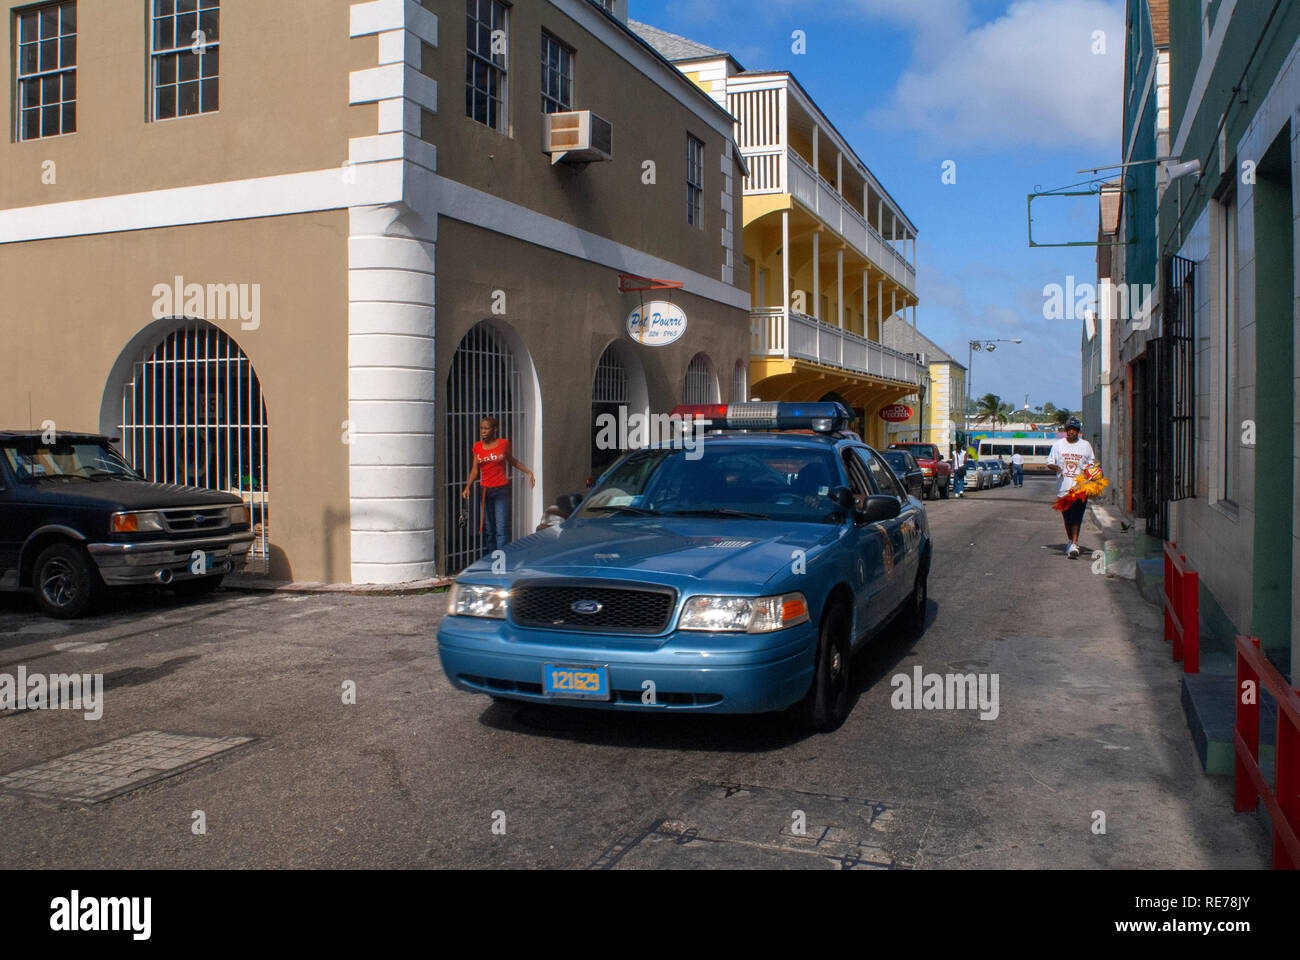 Police car in Old town in Nassau, Bahamas Stock Photo